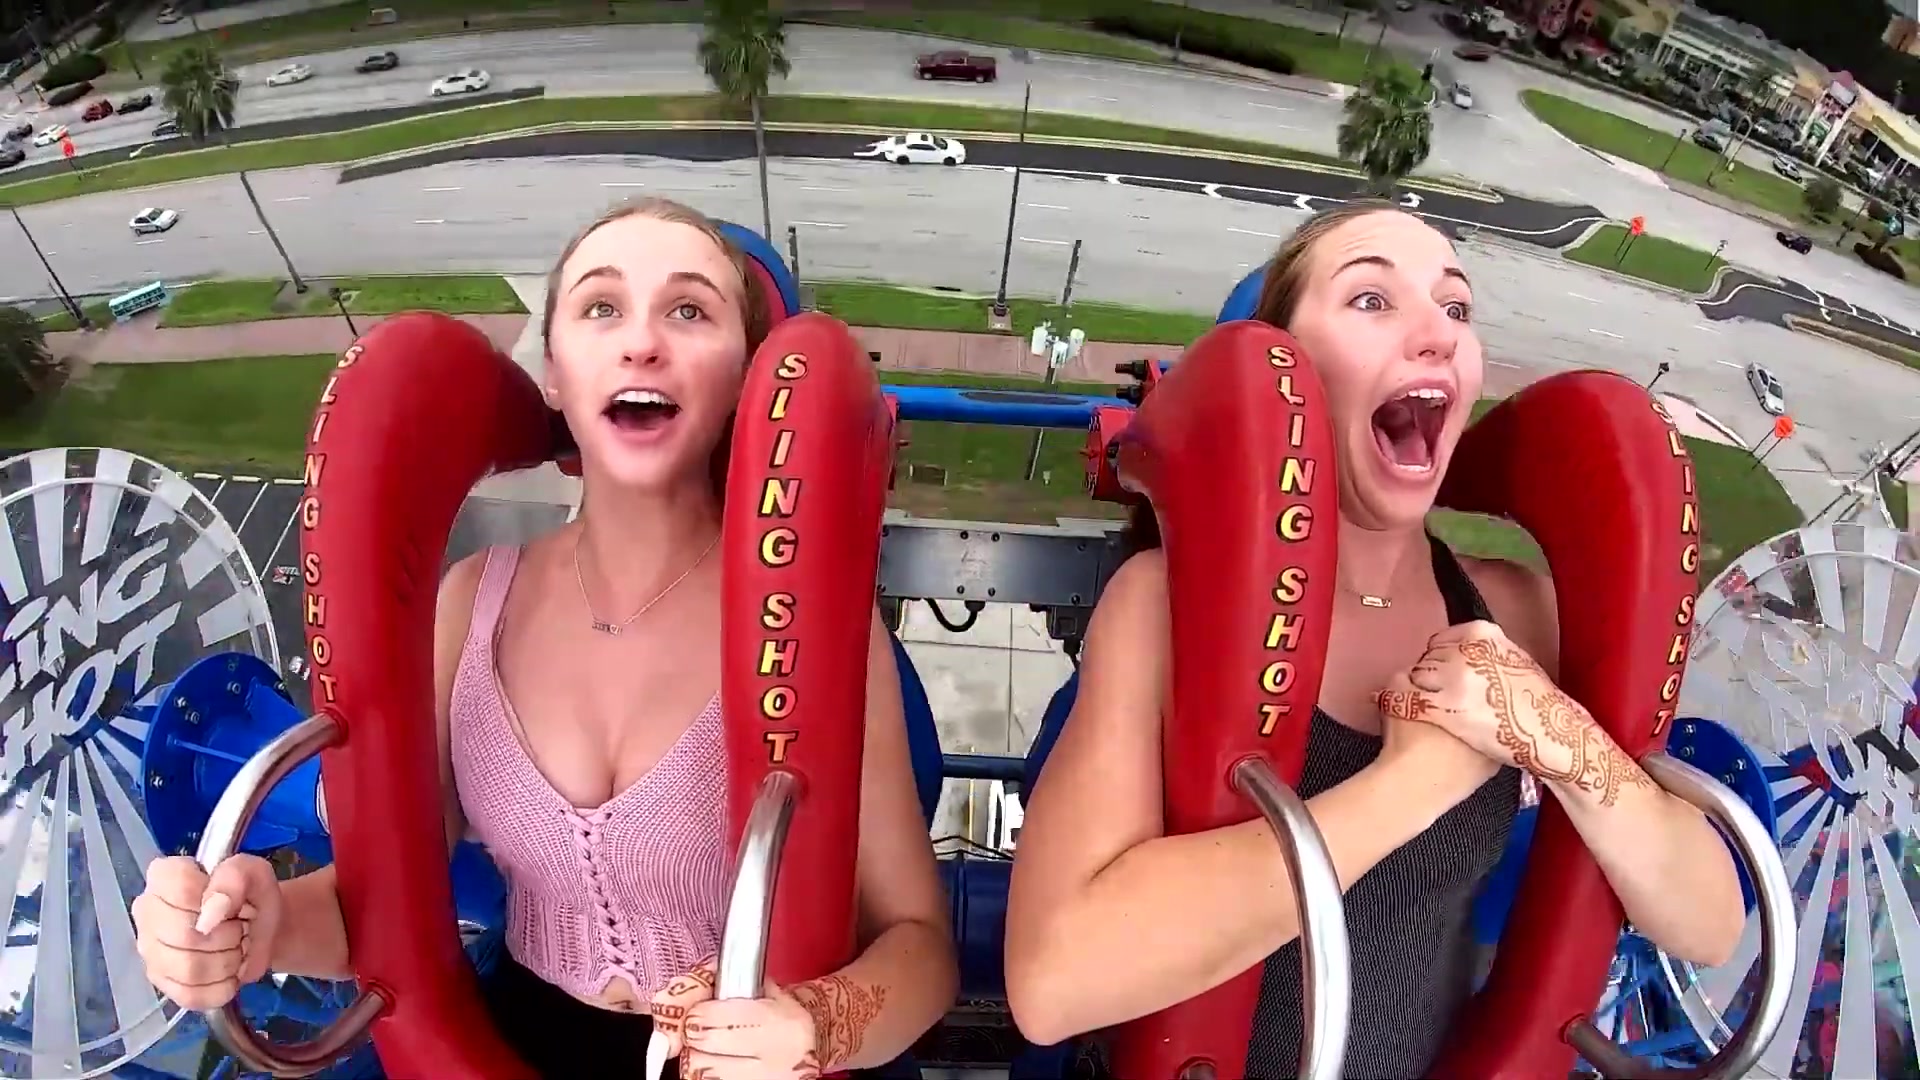 Boobs come out on sling shot ride